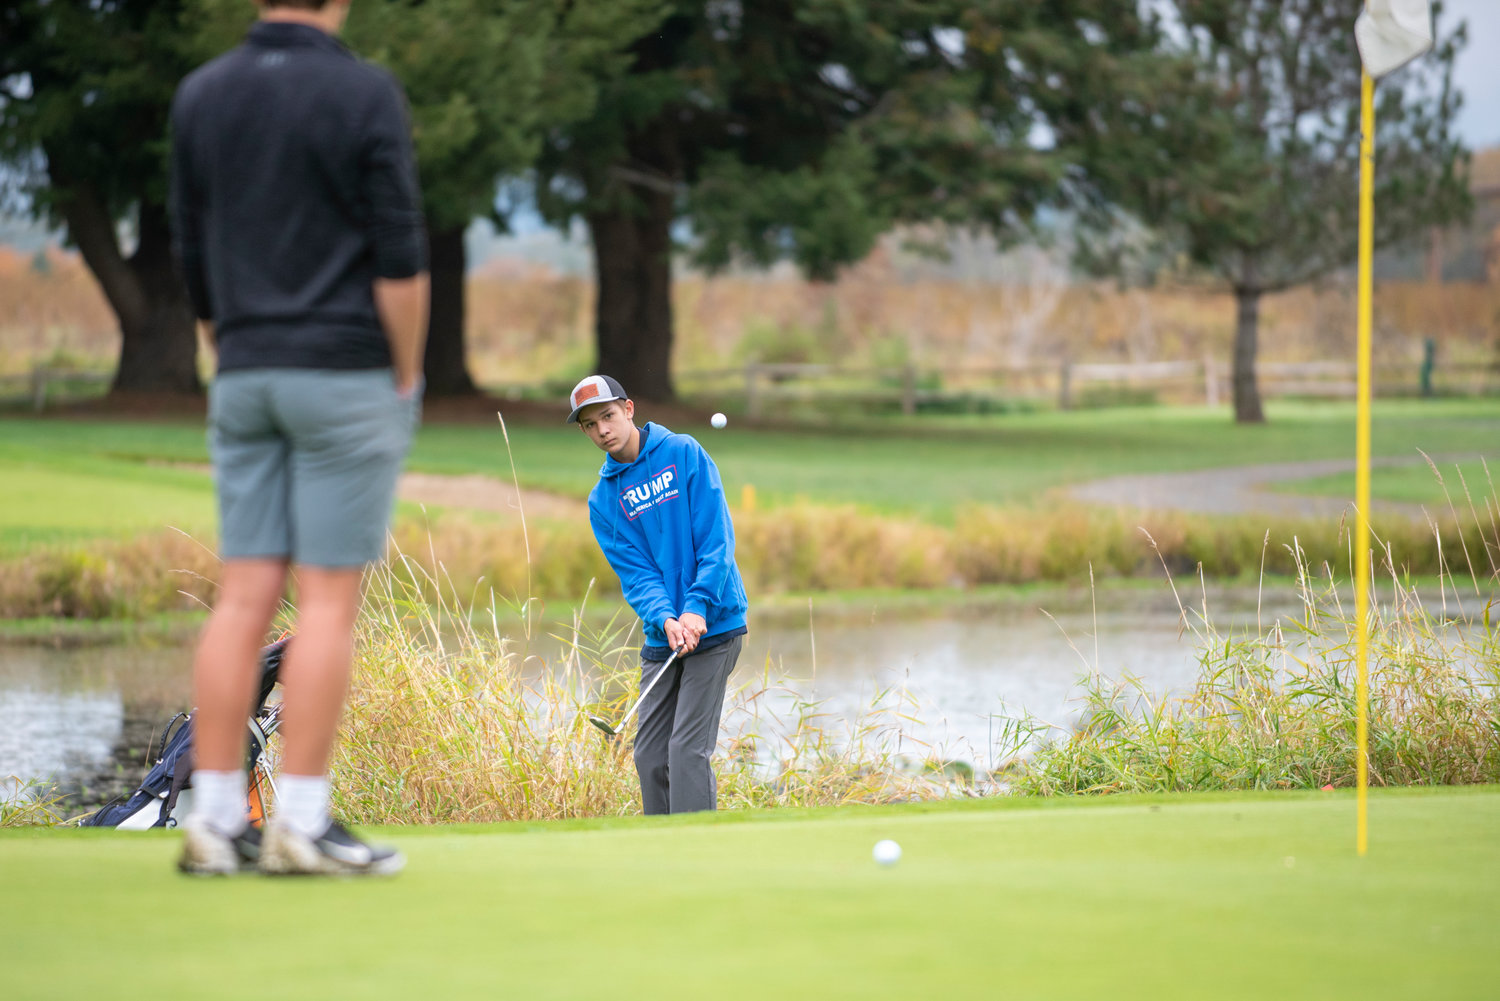 Black Hills' Luke Fenner chips a shot near the 17th hole during the 2A Evergreen Conference championships at Riverside Golf Course on Oct. 18, 2021.